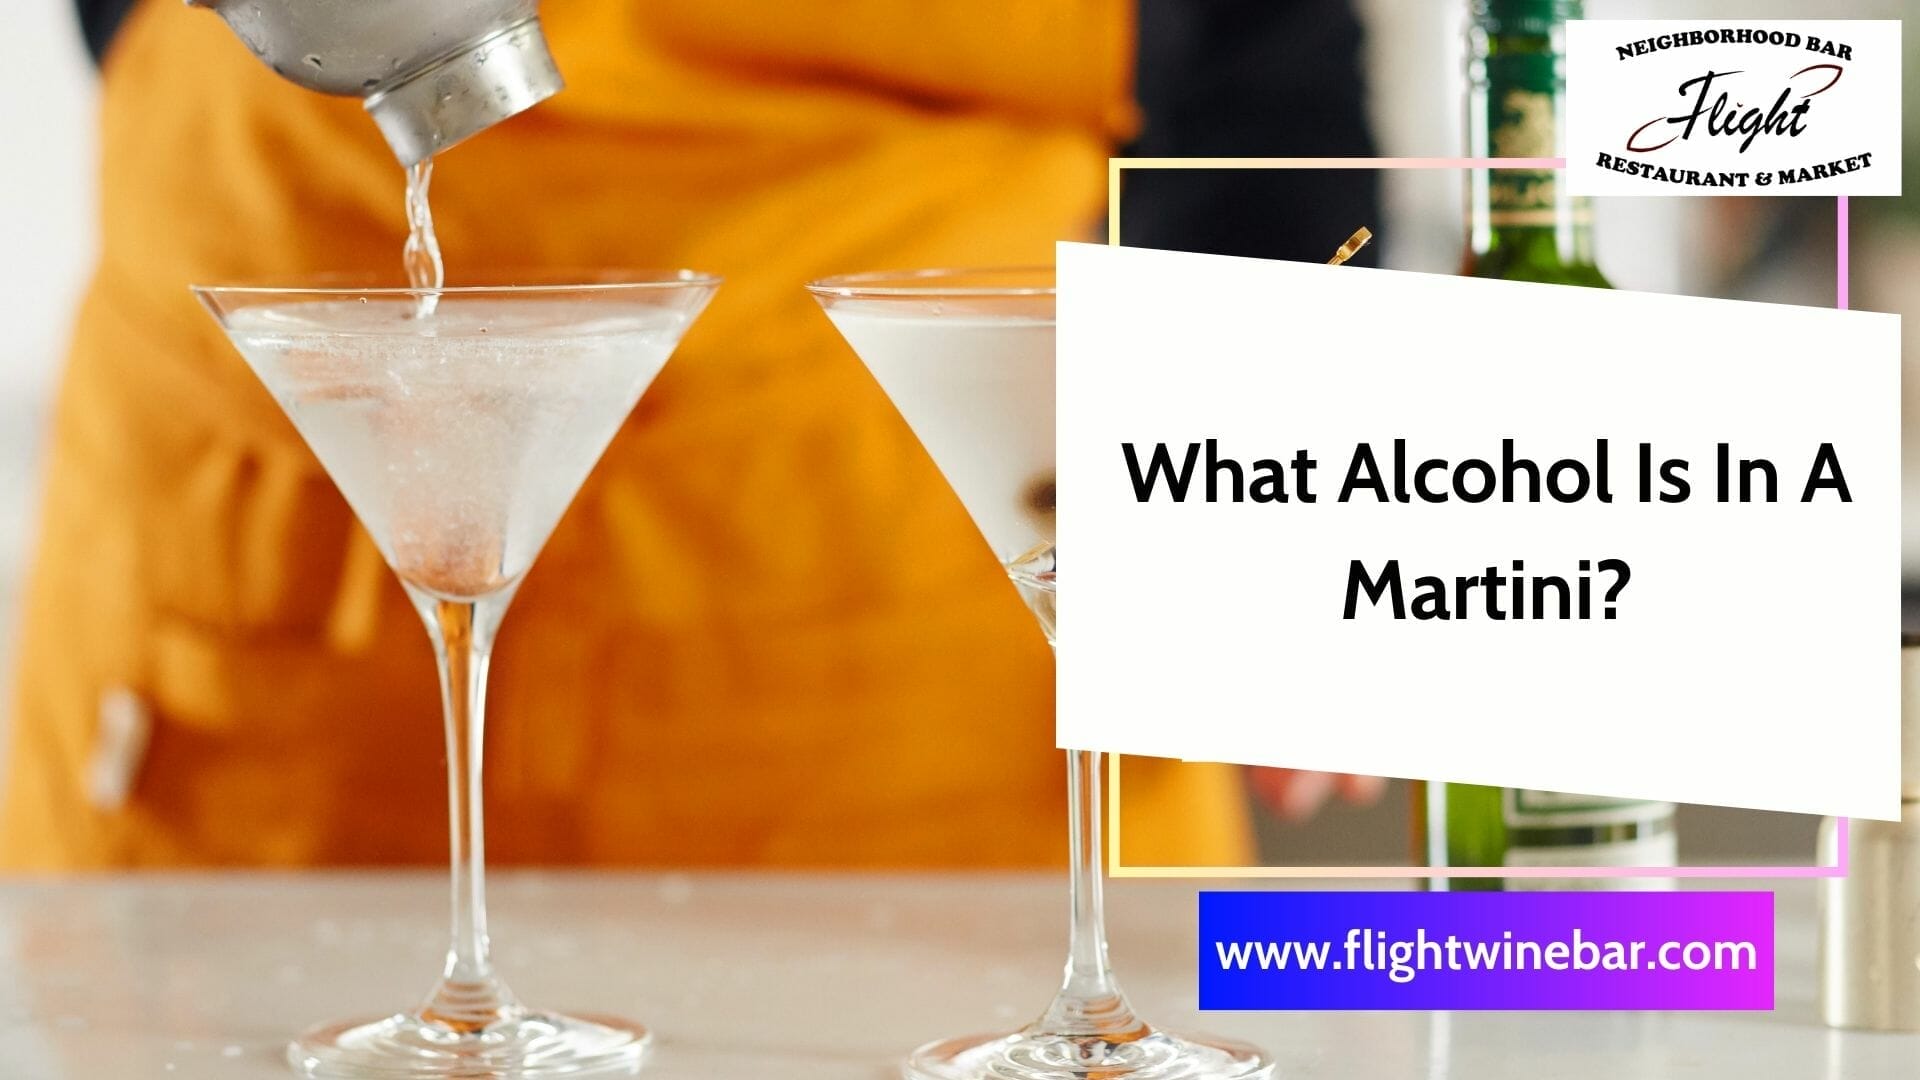 What Alcohol Is In A Martini